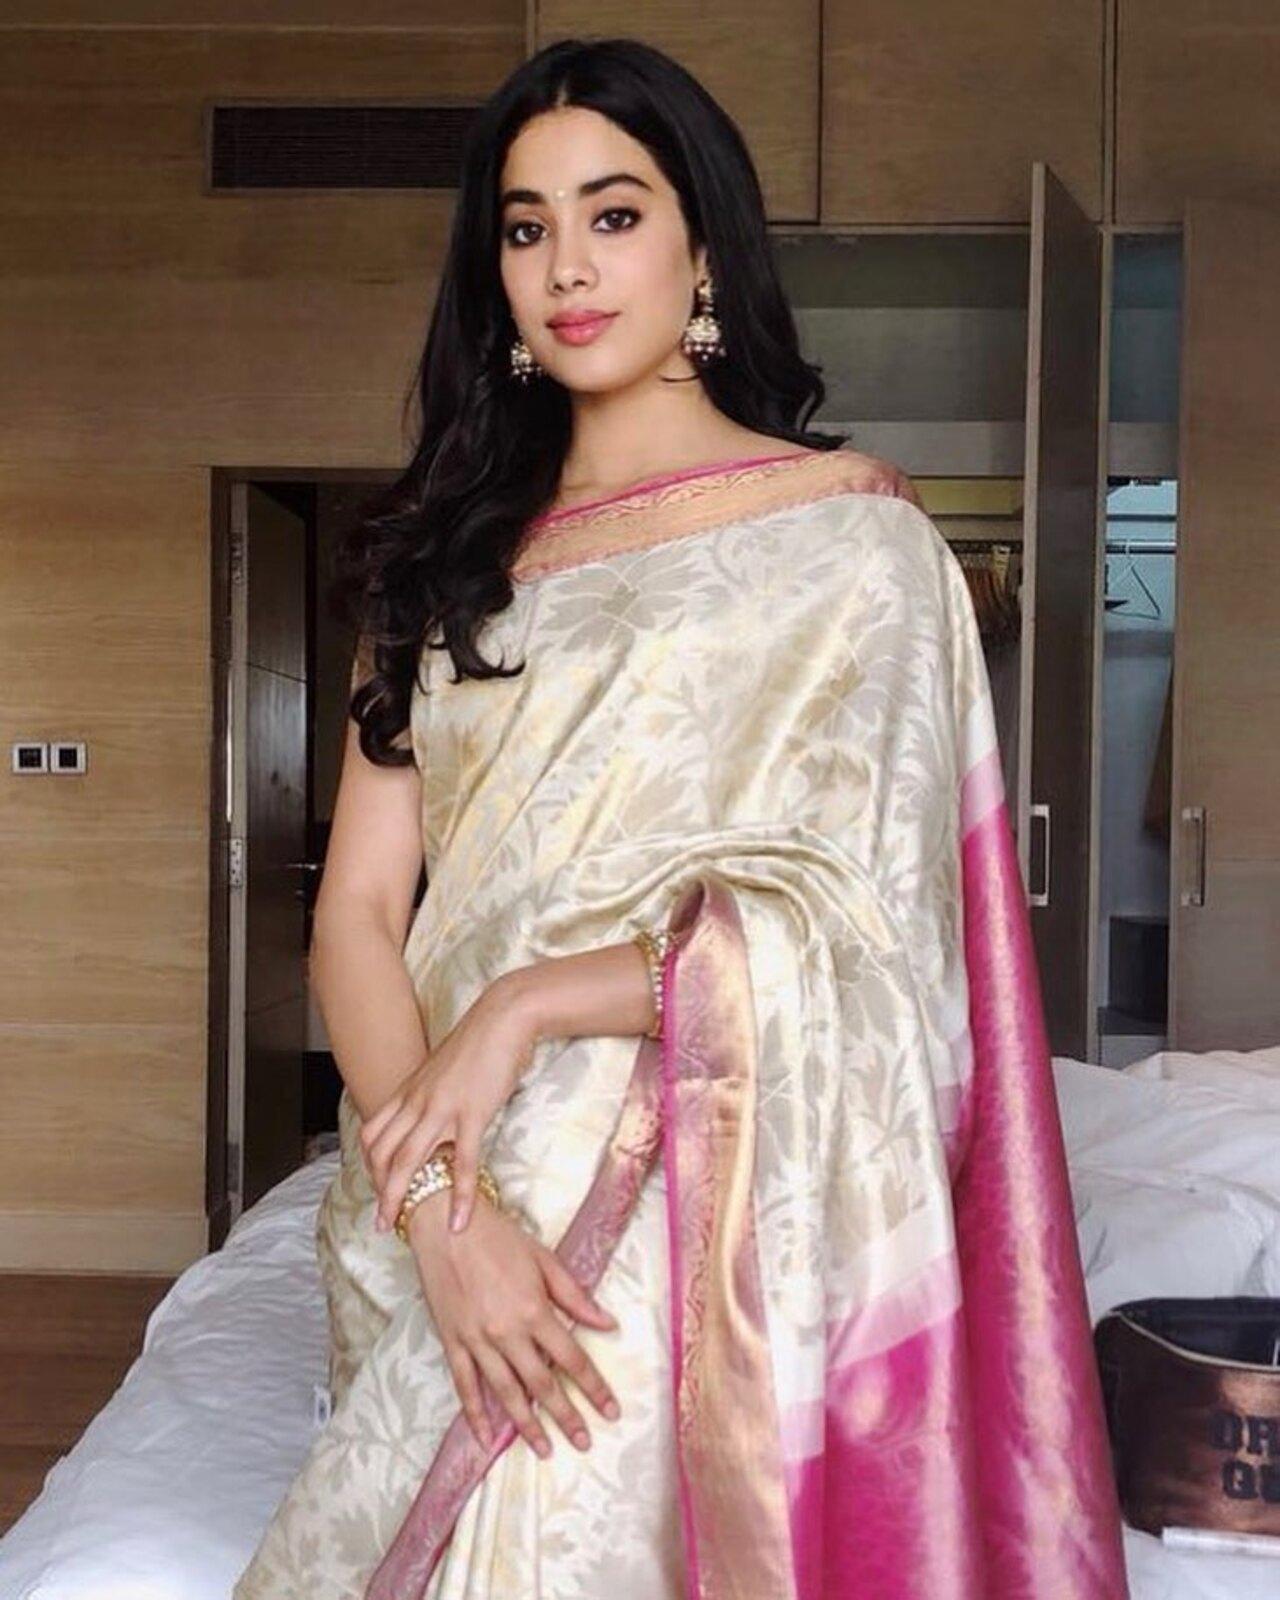 Janhvi Kapoor wore the same saree Sridevi wore at Ram Charan’s wedding for accepting her late mother’s National Film Award in 2018. 